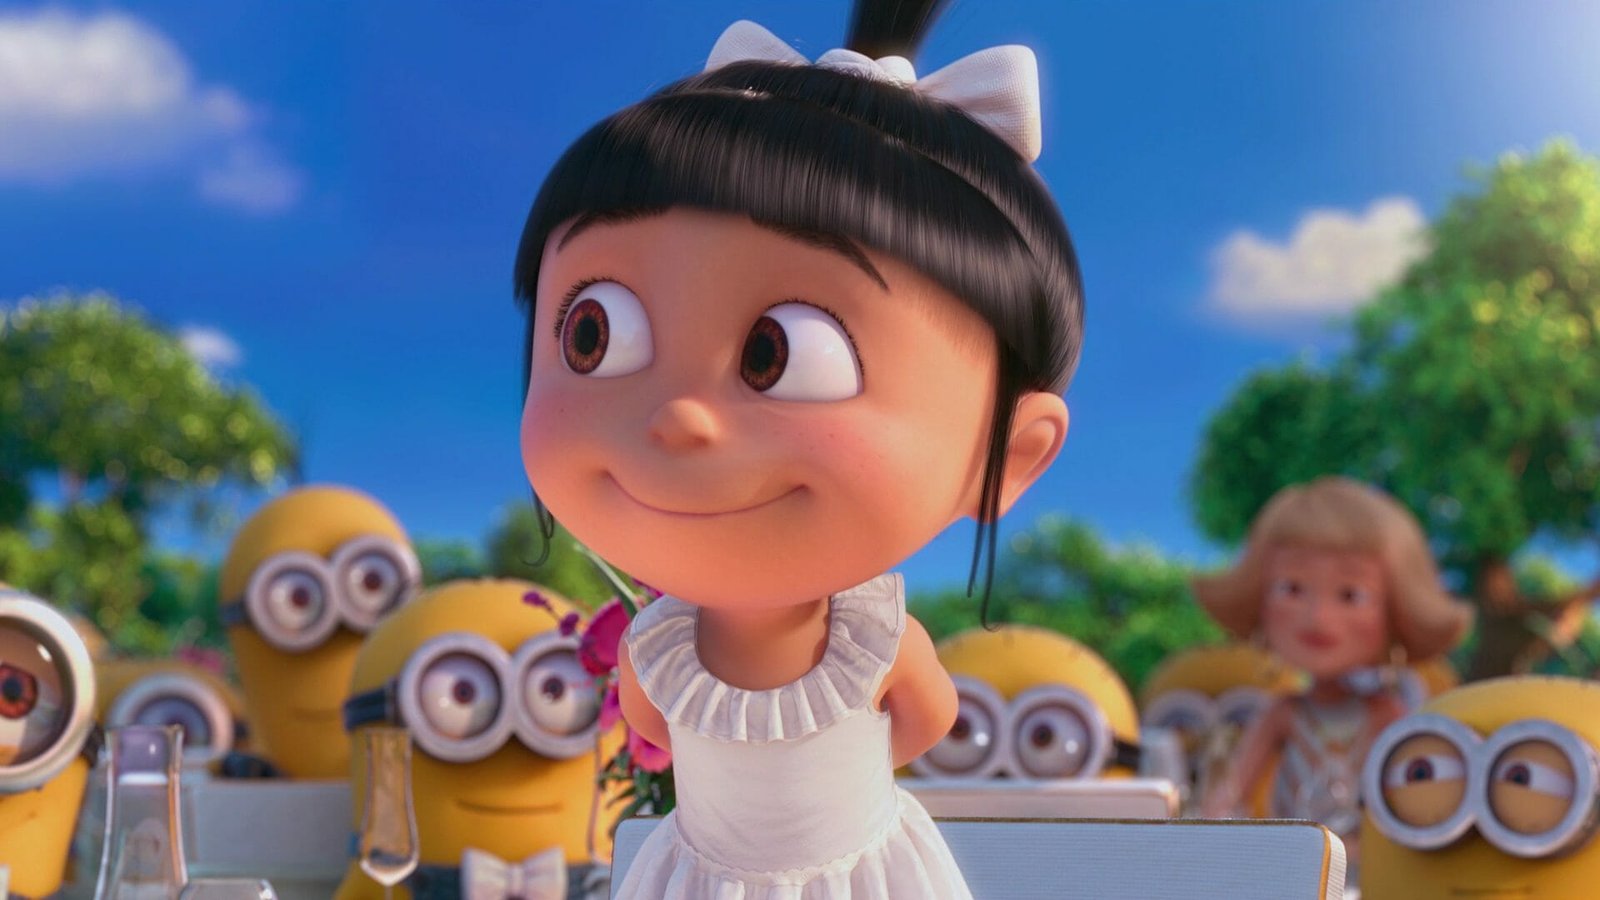 Netflix Animated Movies: Despicable Me